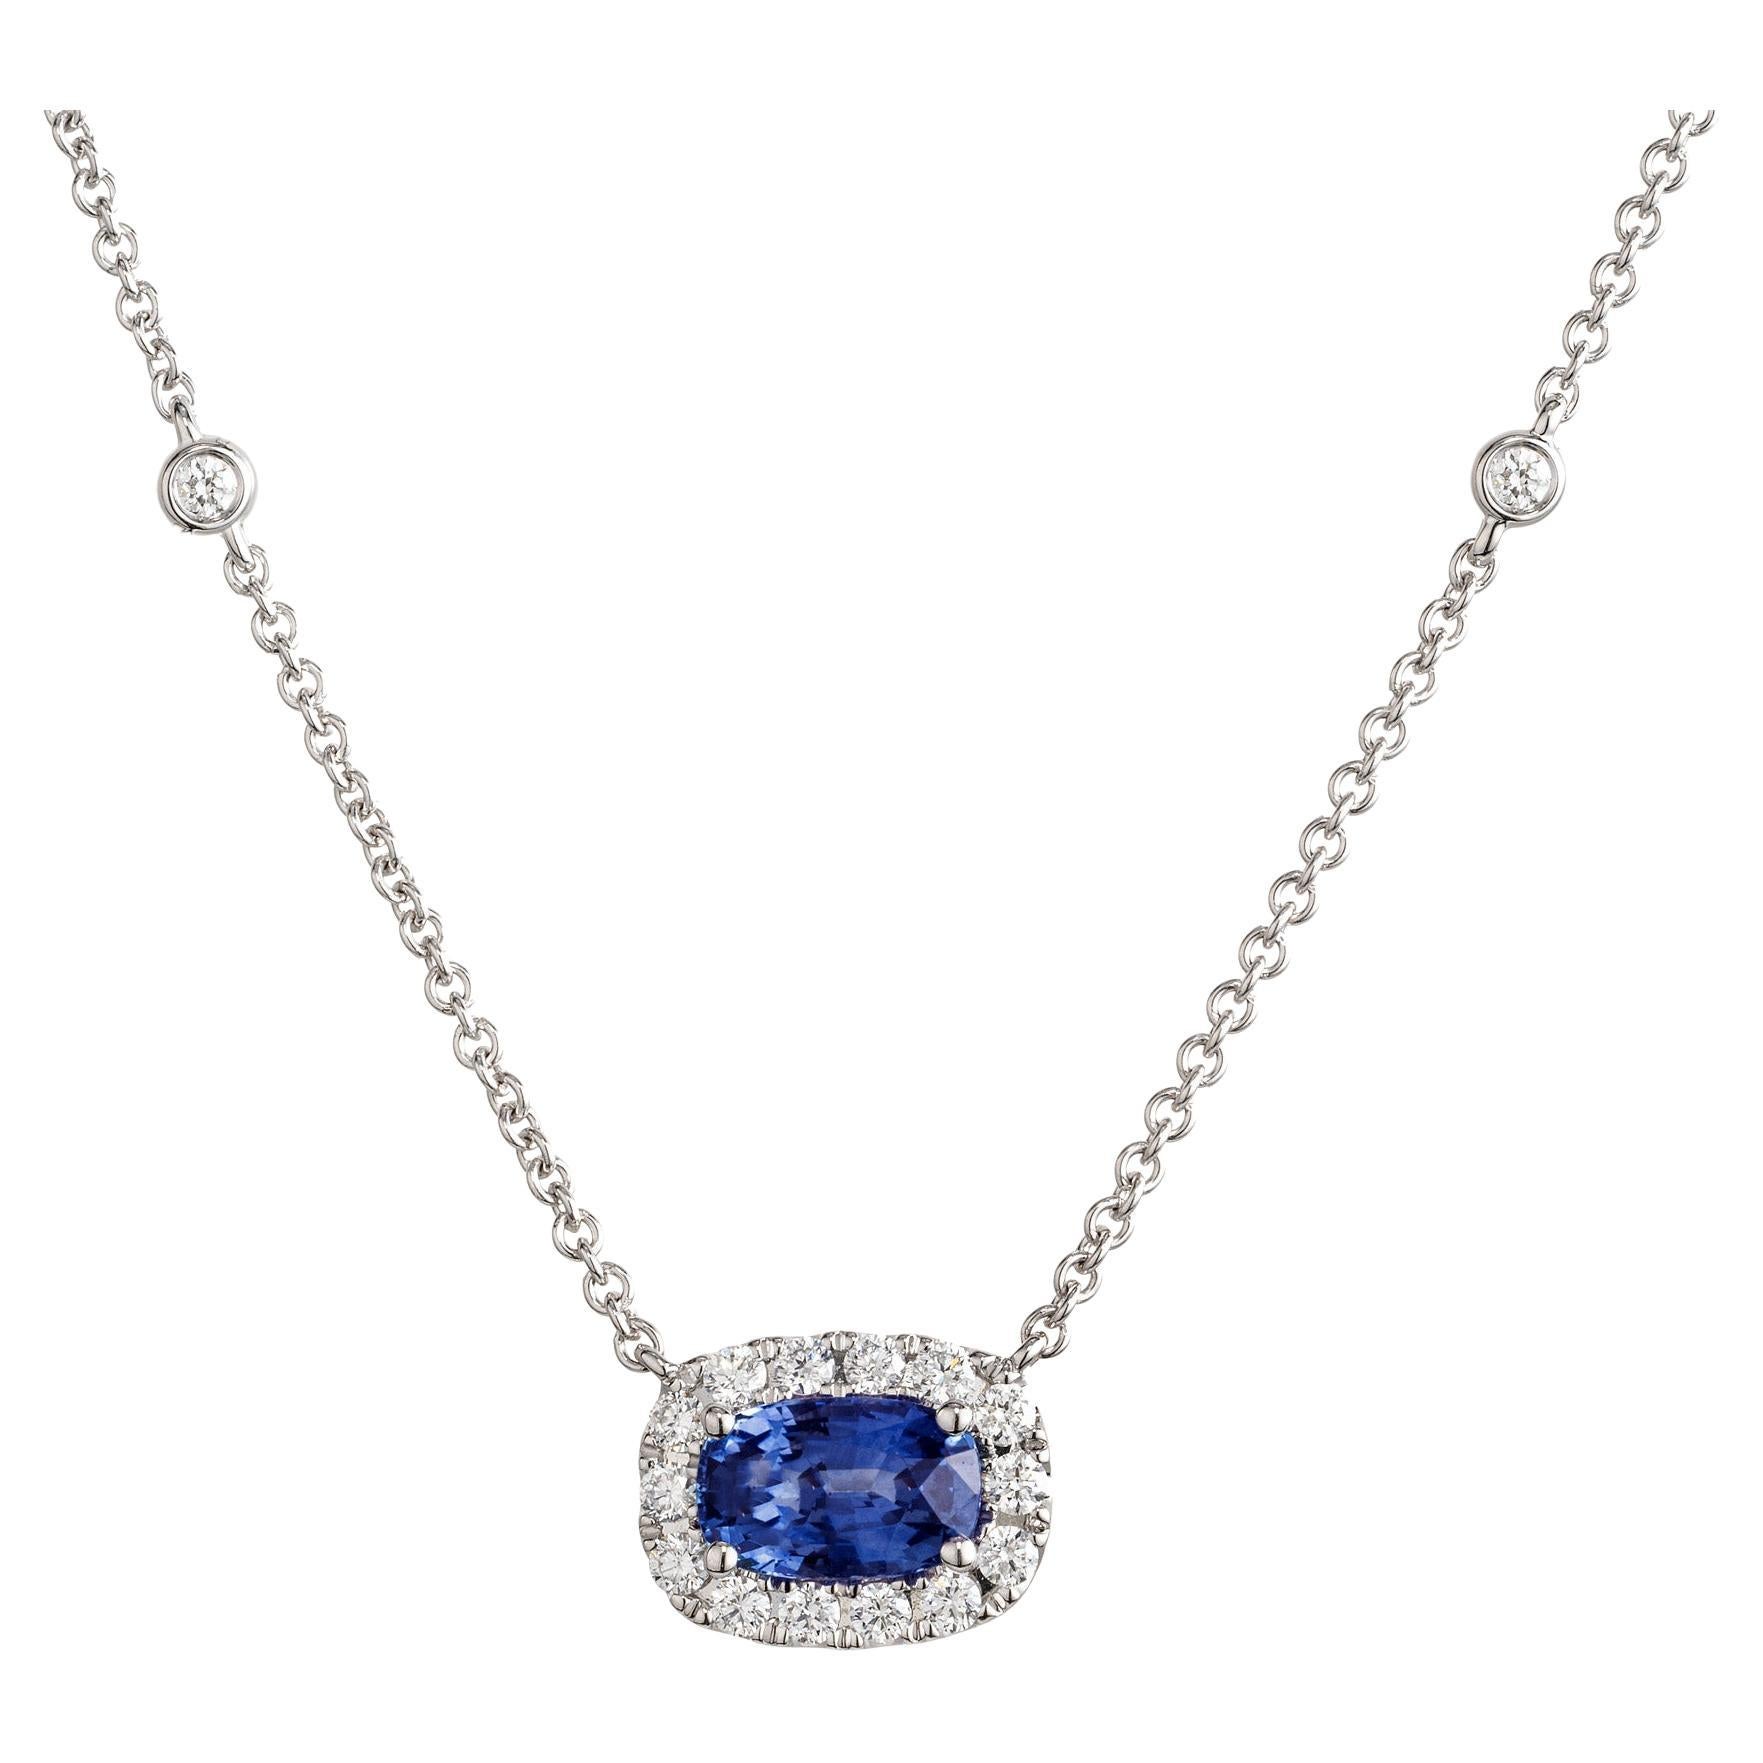 Peter Suchy 1.29 Carat Sapphire Diamond Halo White Gold Pendant Necklace For Sale